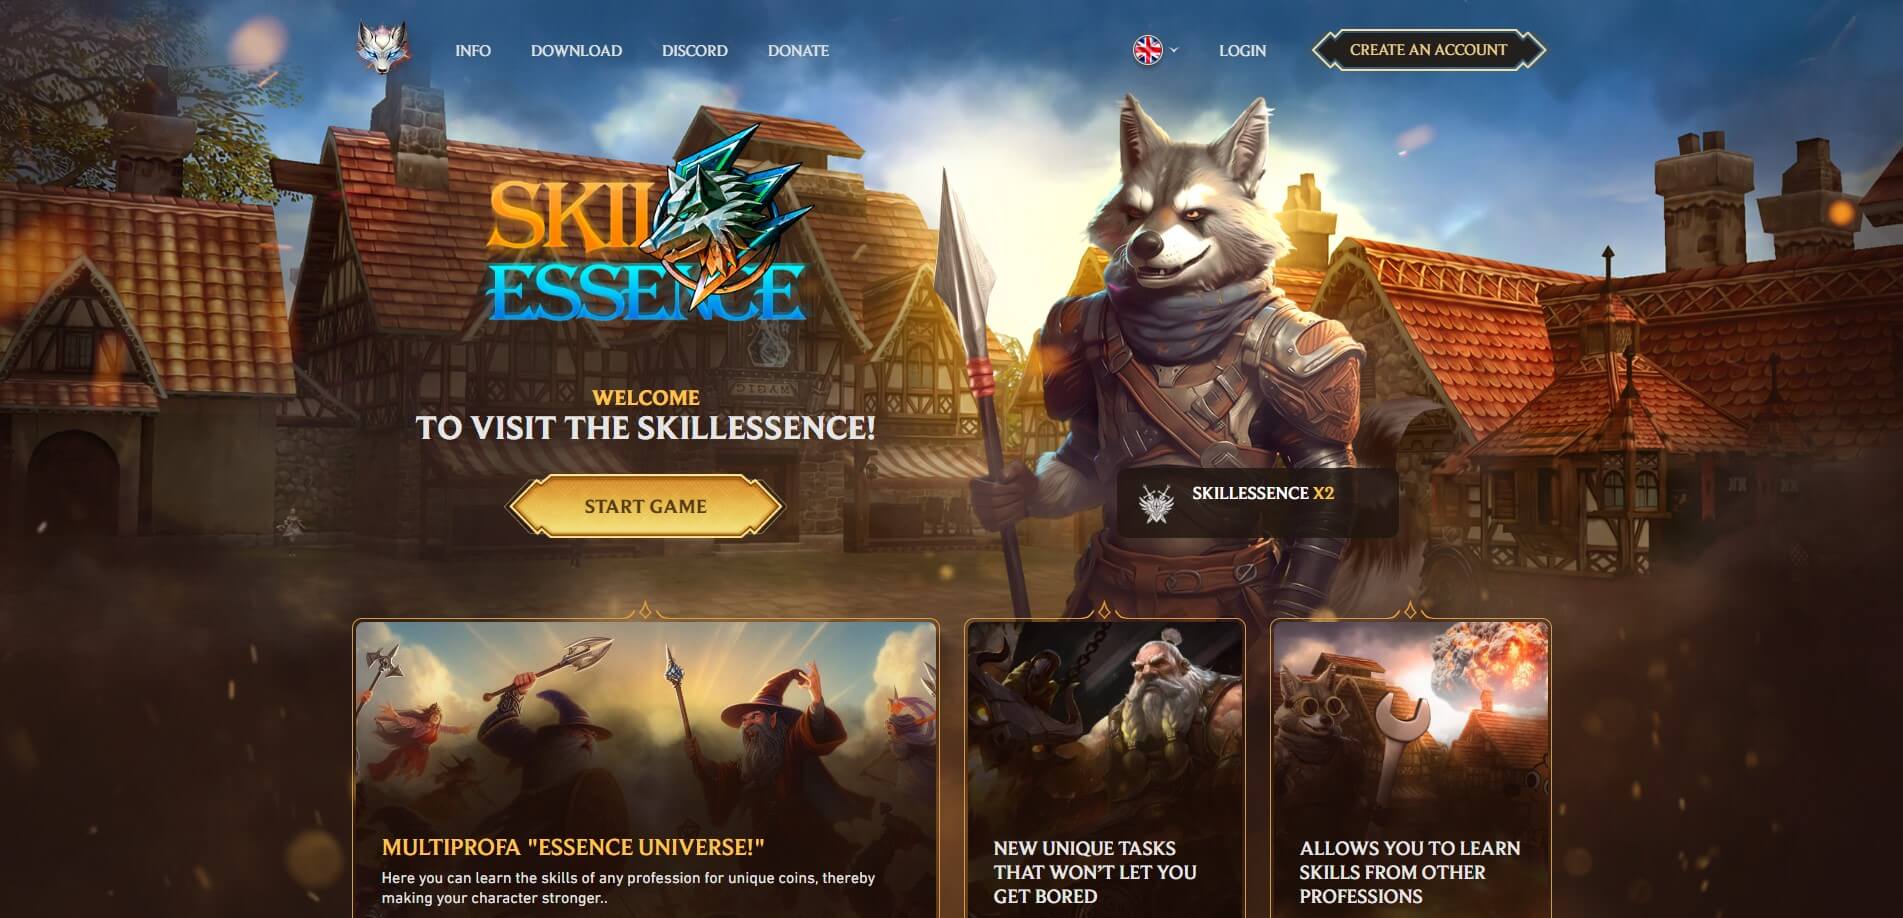 🌟💫 Welcome to Lineage 2 Essence server with x2 rates on skillessence.fun! Dive into the world of adventures! 💫🌟